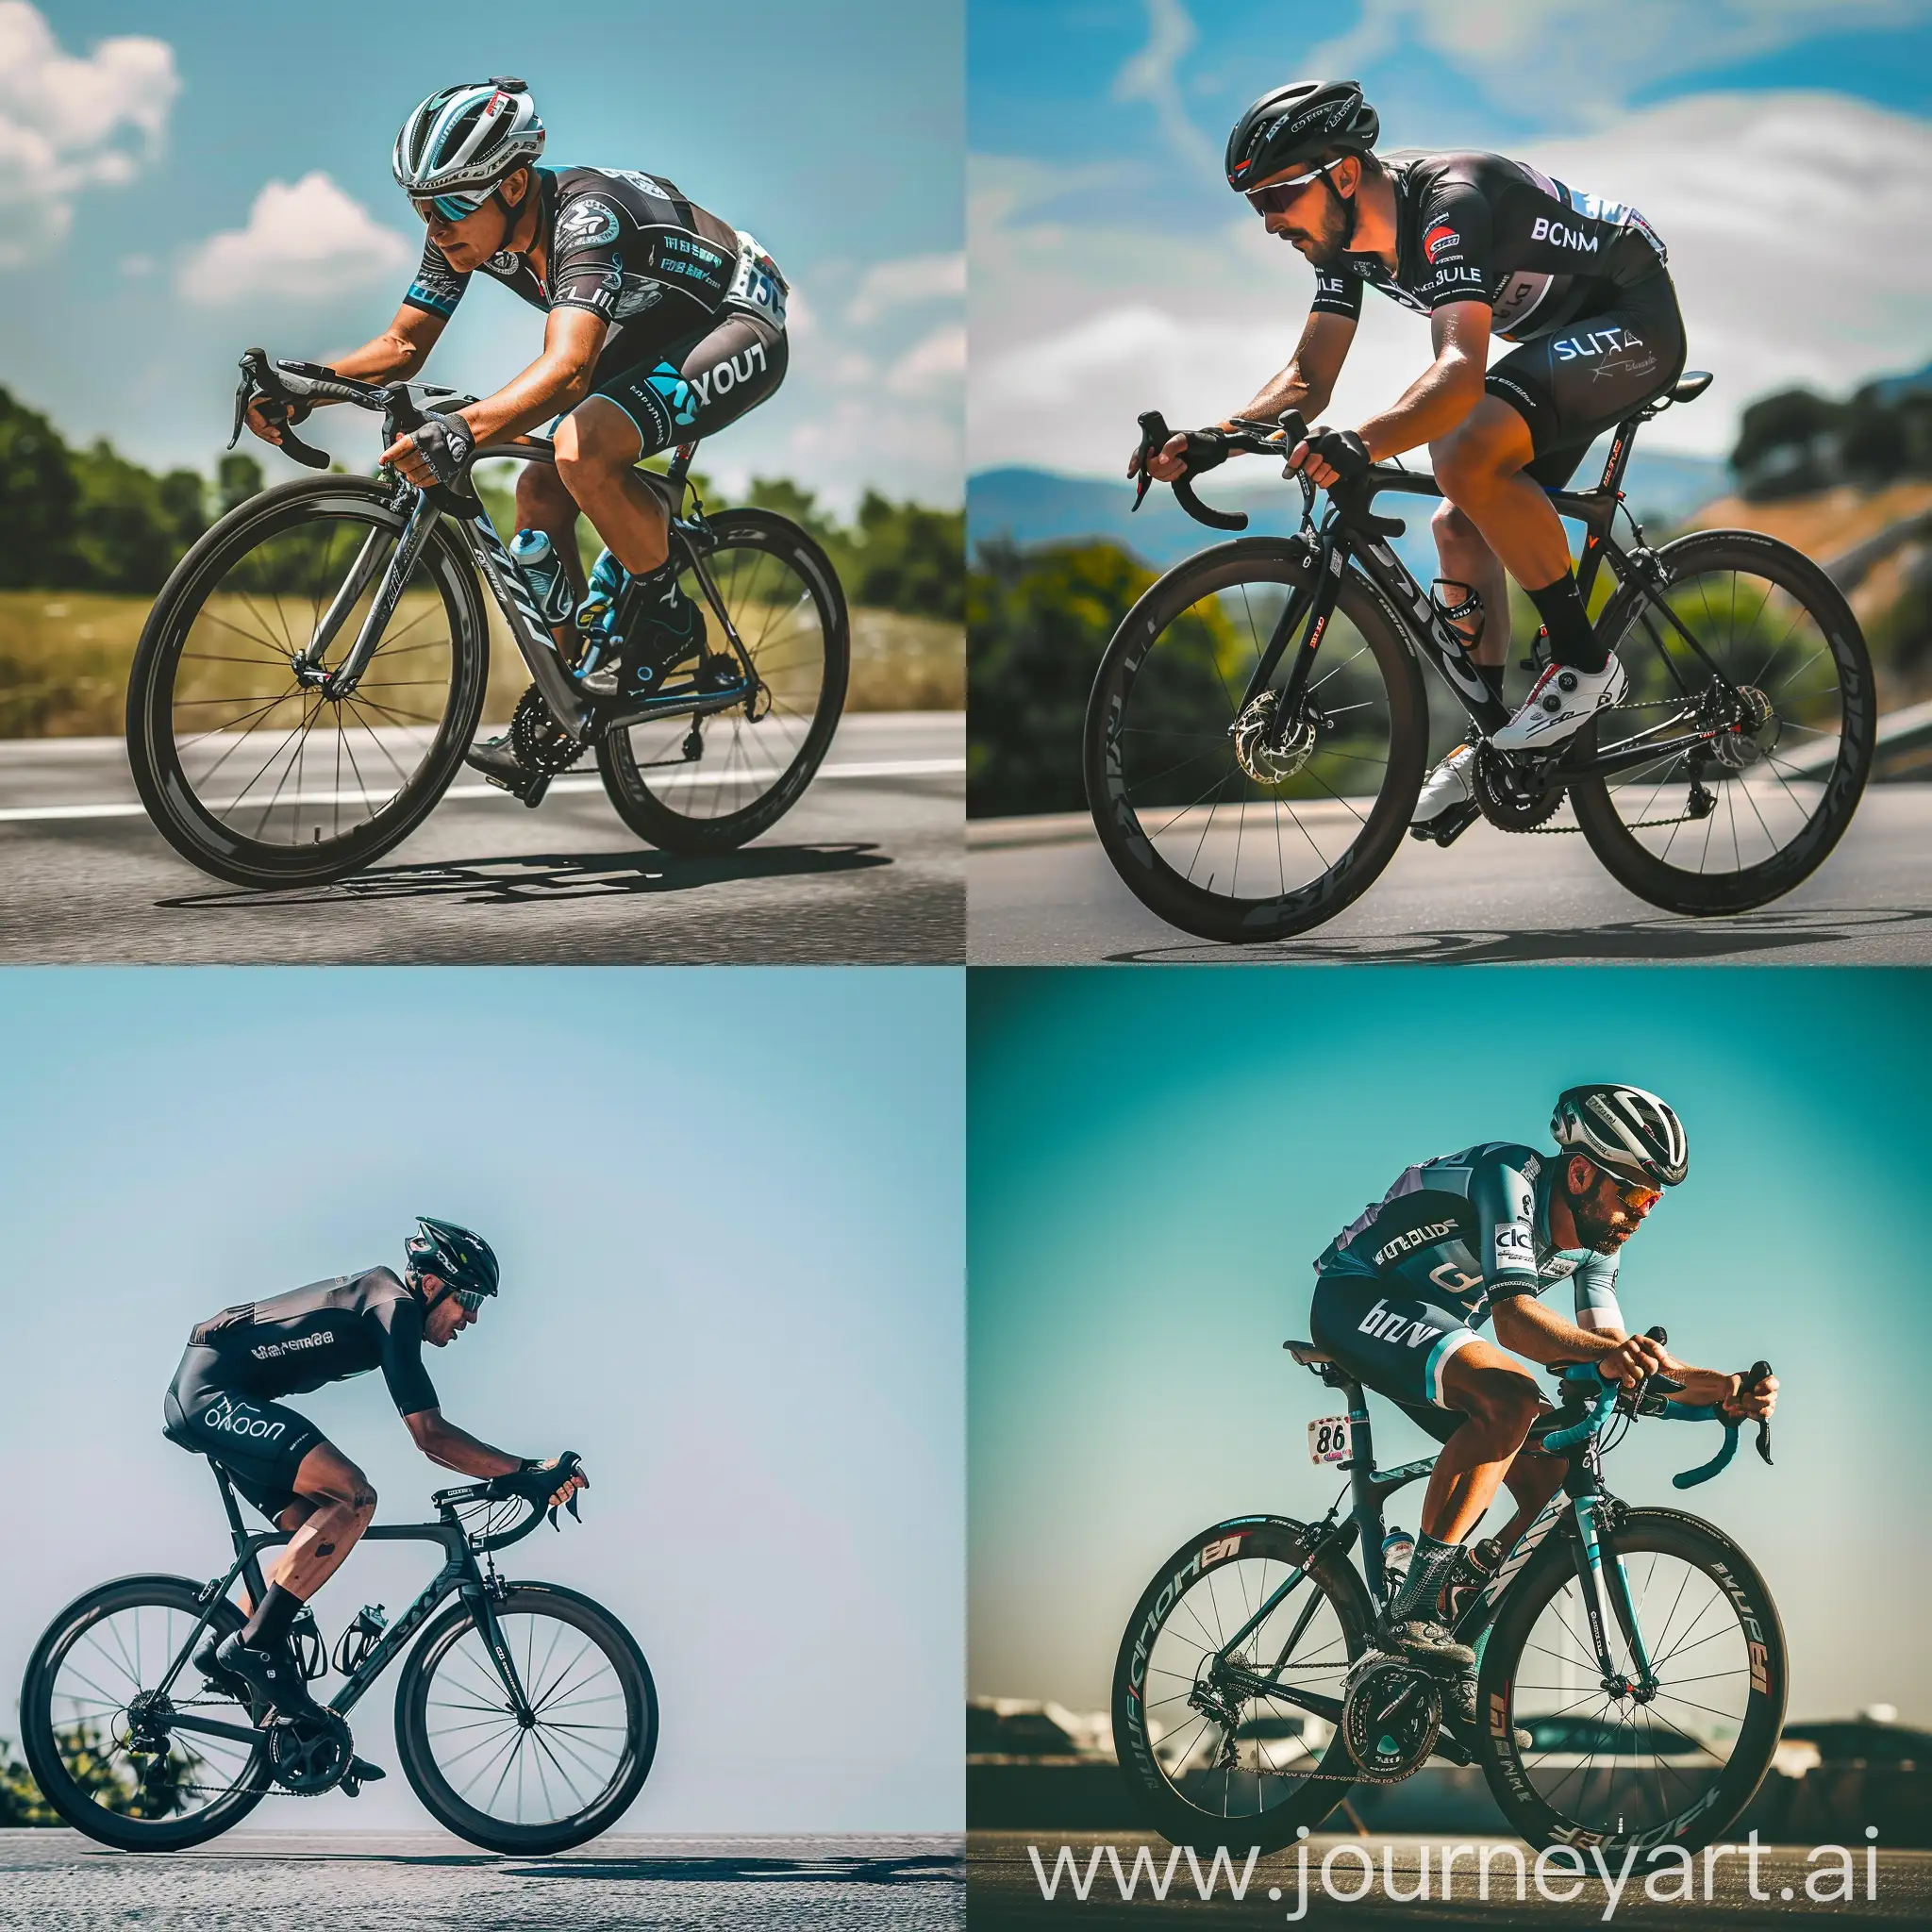 Professional-Cyclist-Training-Full-Body-Action-Shot